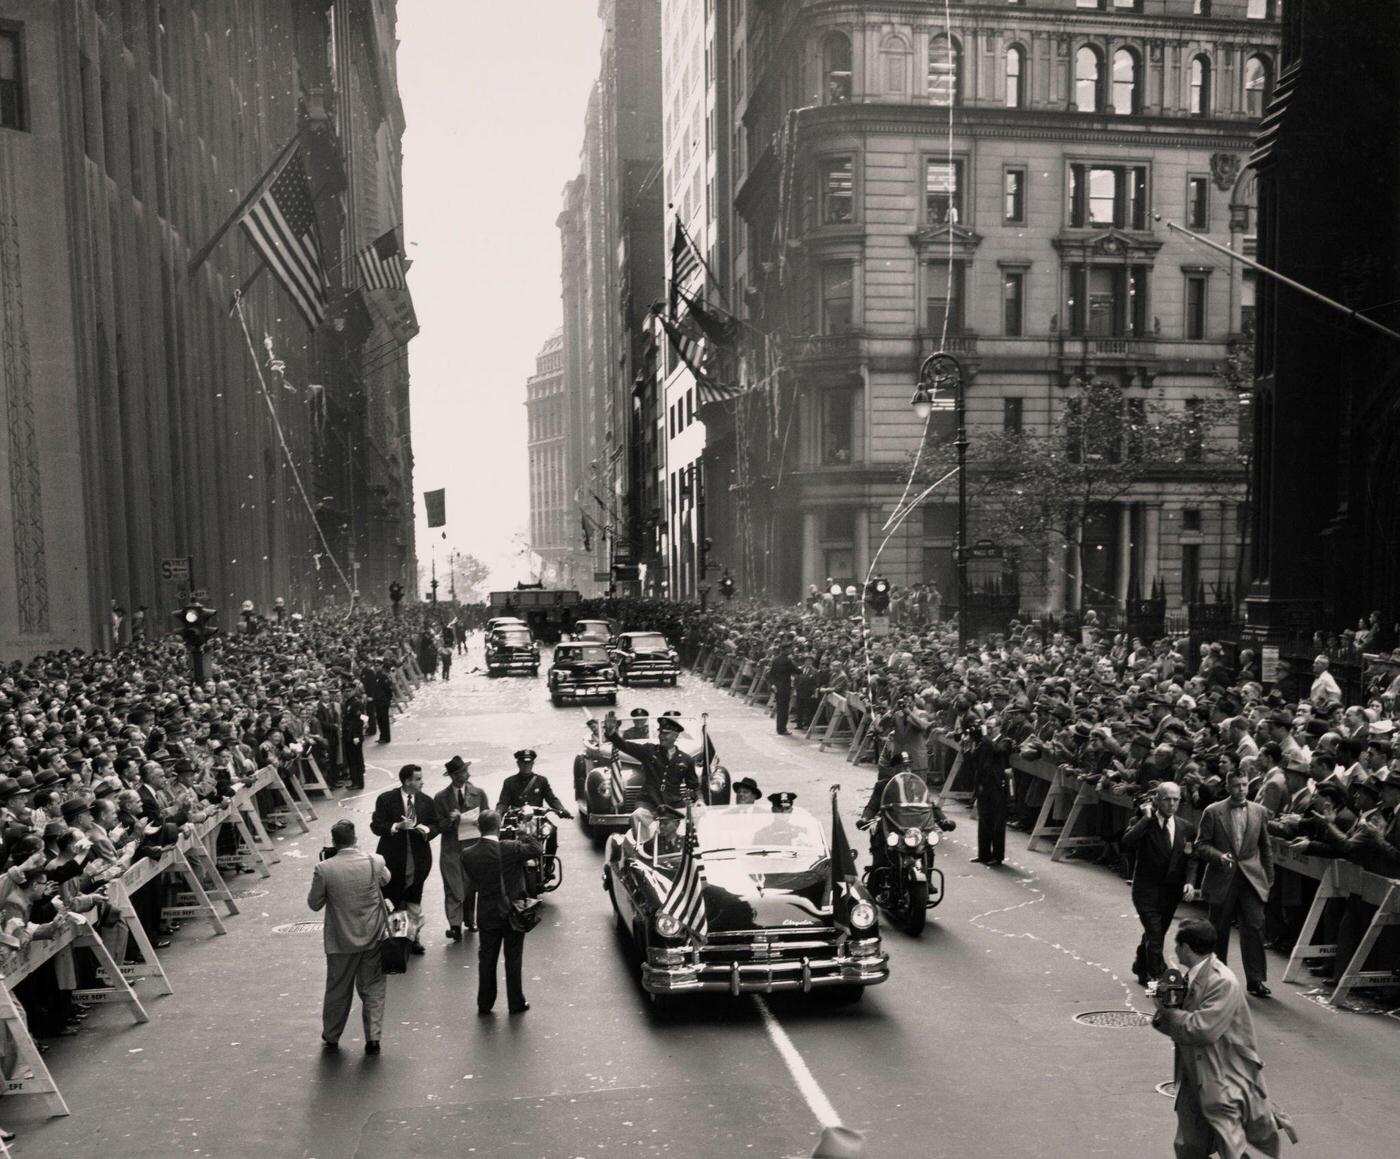 Welcome For General Dean: Major General William F Dean Waving During A Ticker-Tape Parade On Broadway, Manhattan, 1953.